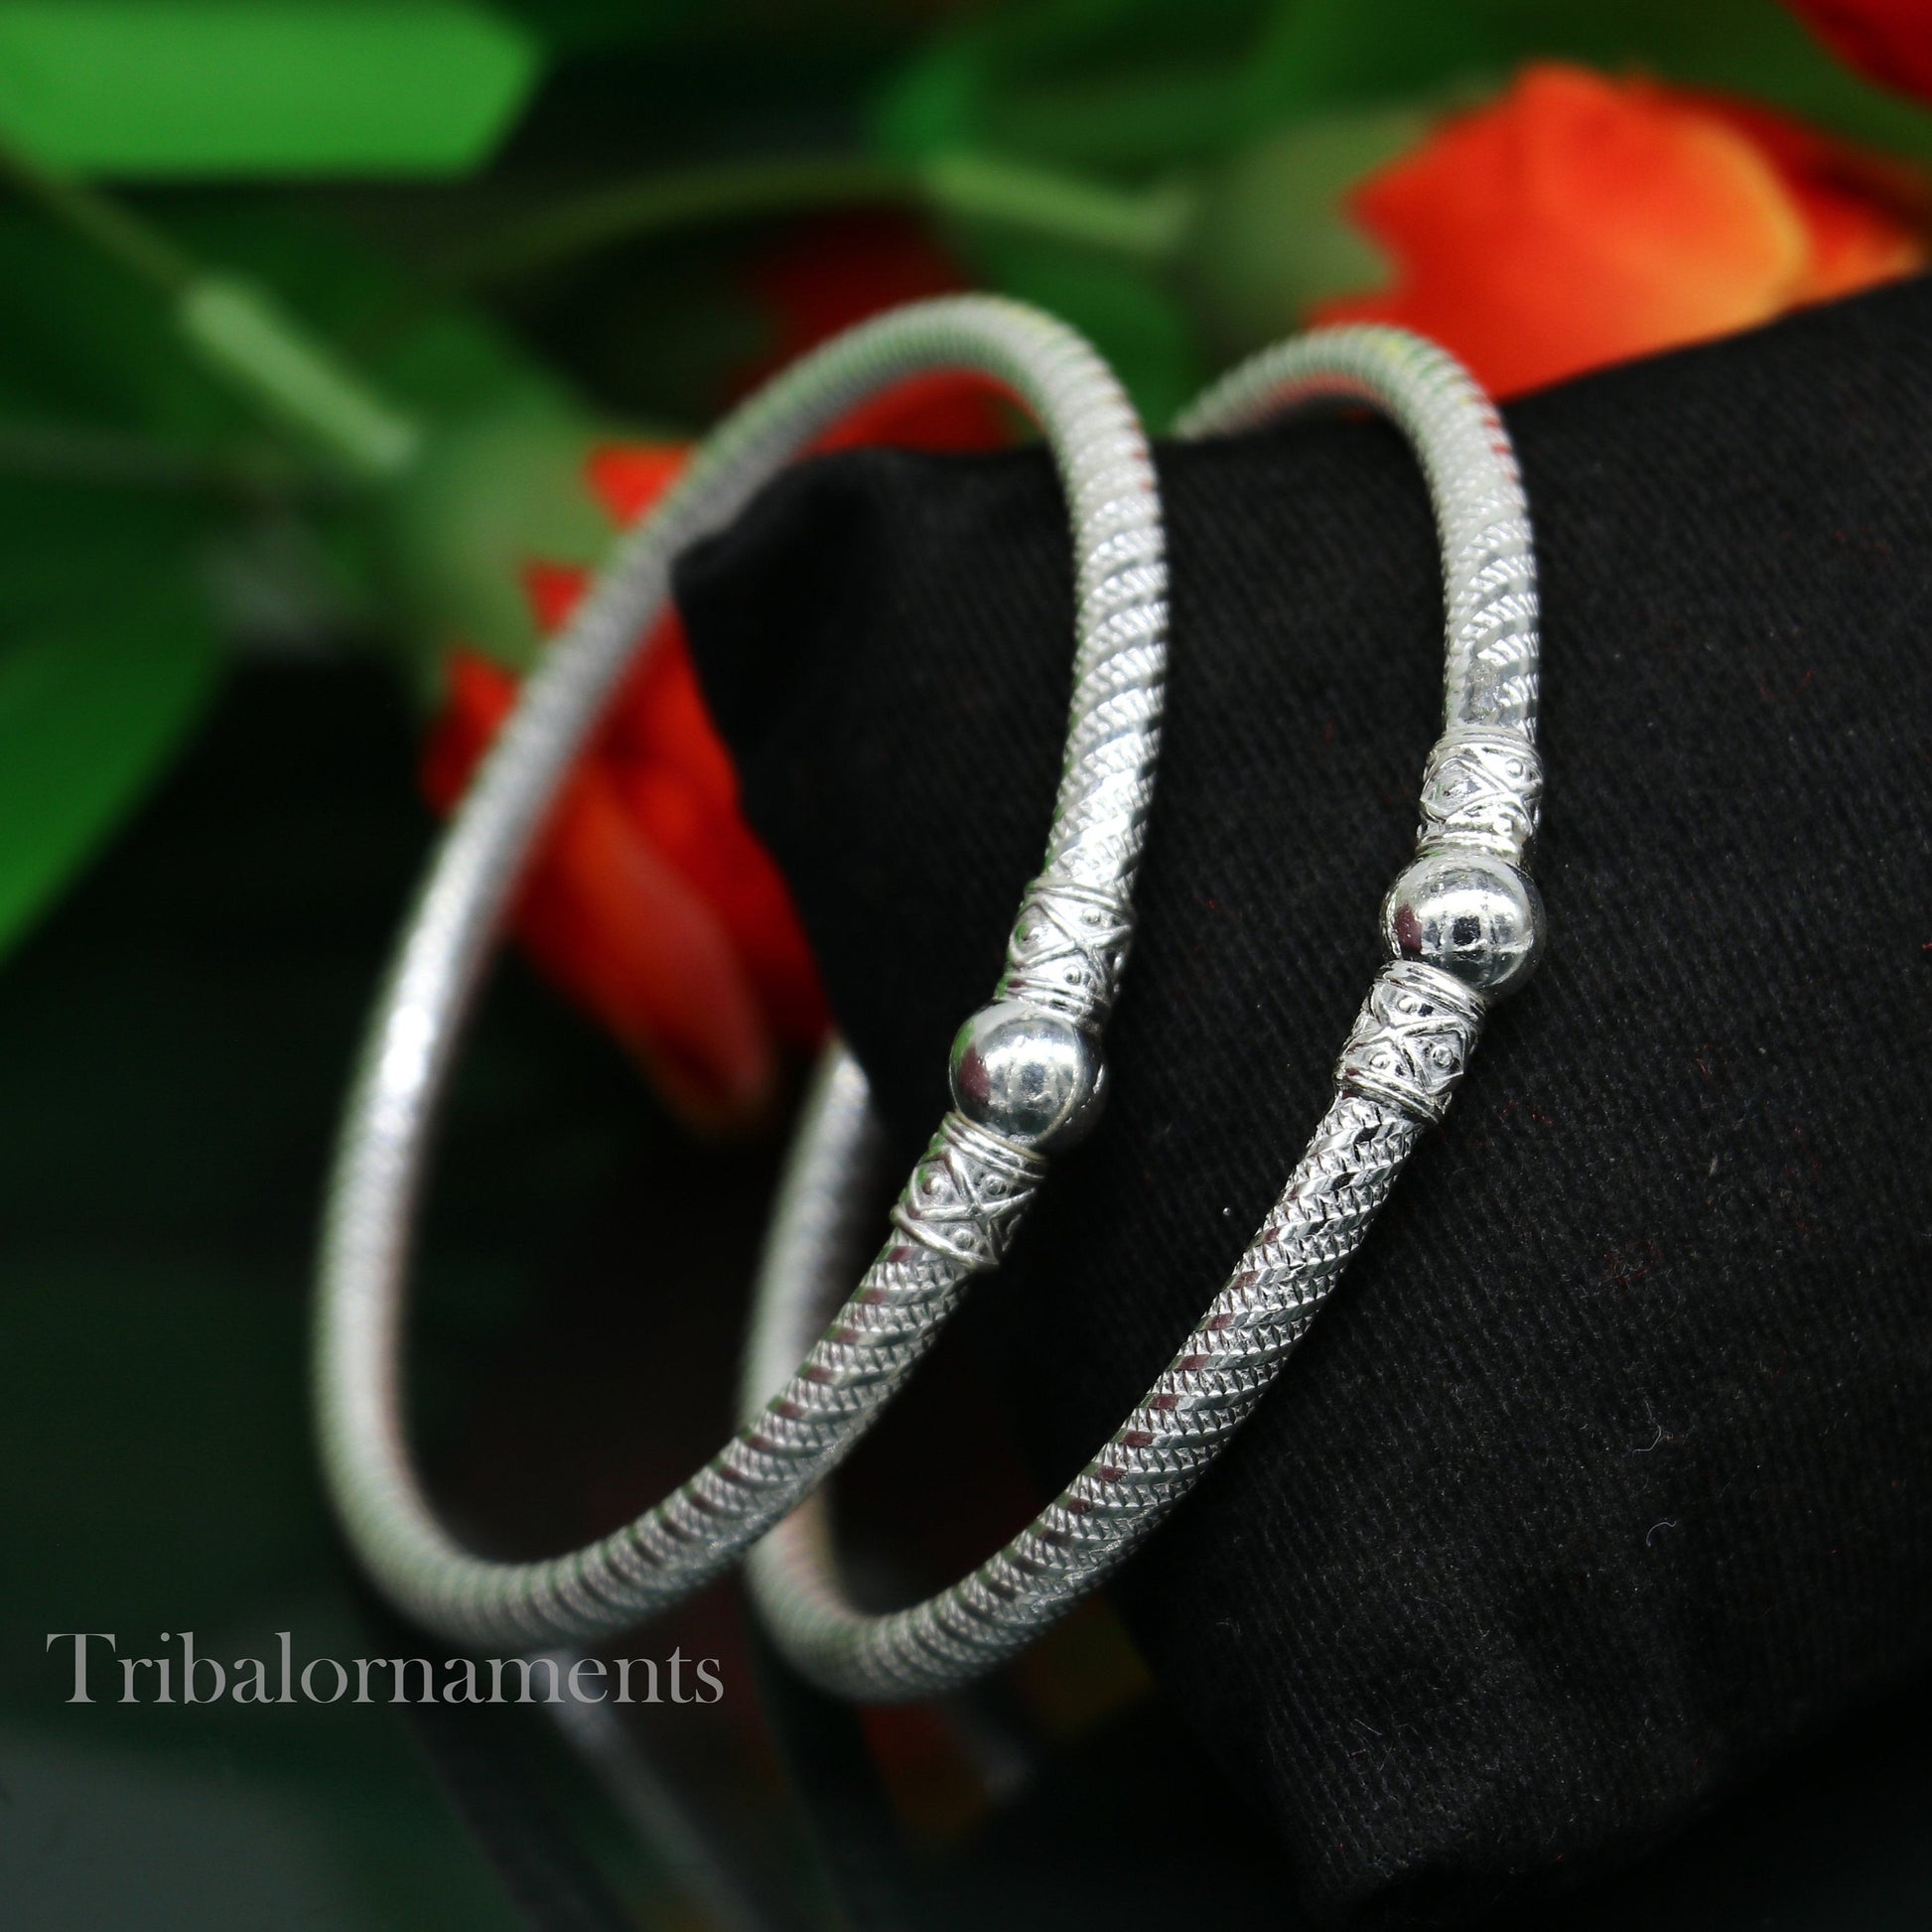 Vintage stylish traditional design handmade sterling silver bangle bracelet kada pair jewelry from india best gift to boy's or girl's nba212 - TRIBAL ORNAMENTS